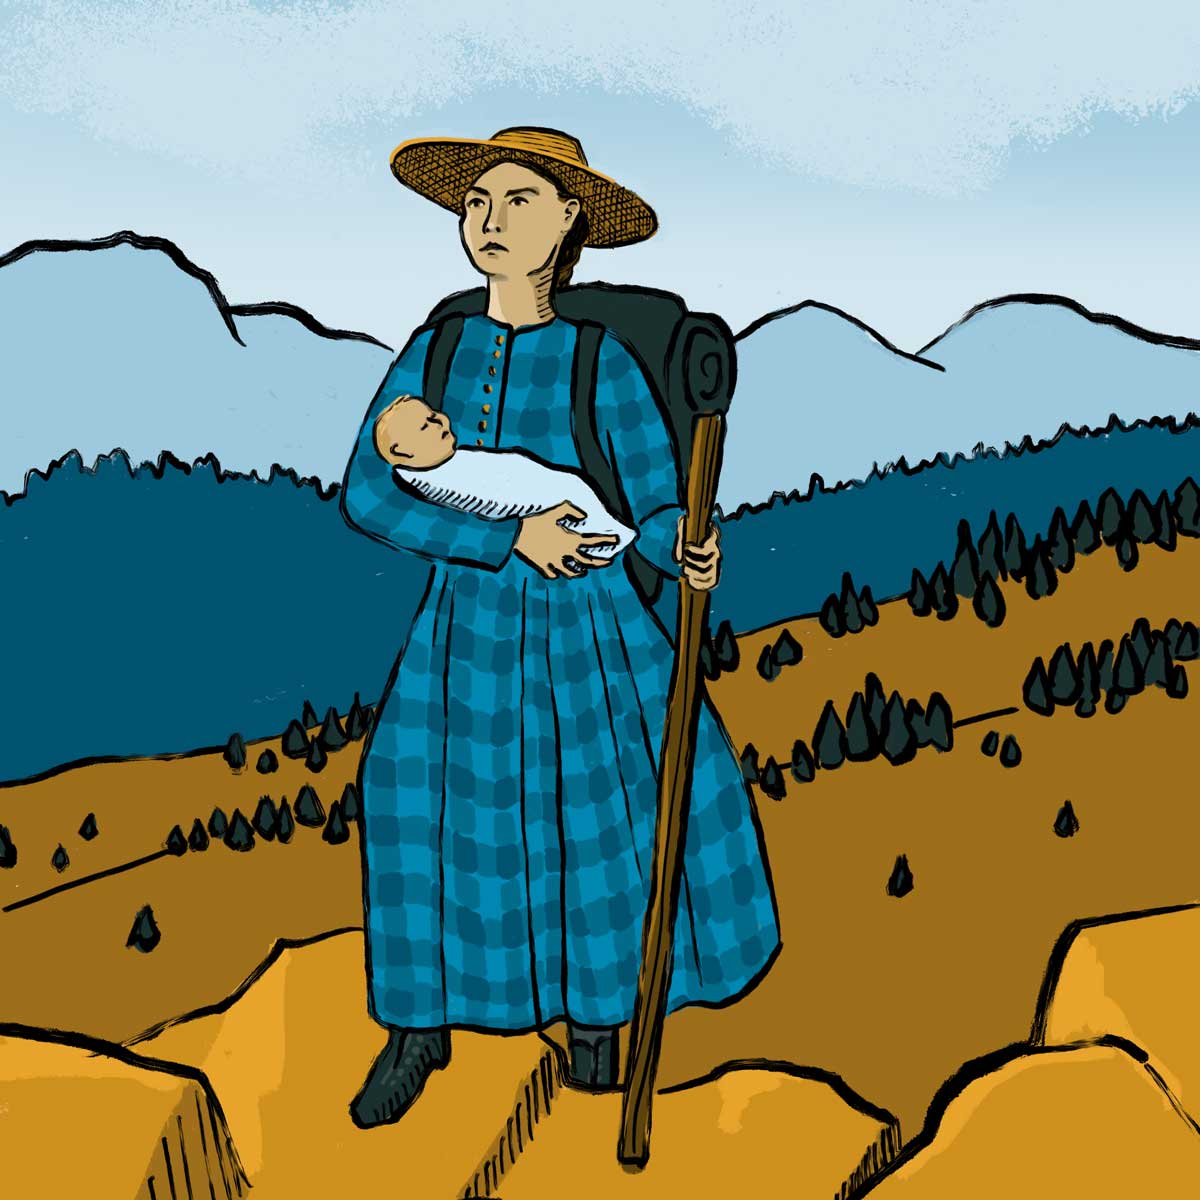 An illustration of a woman in the 1800s wearing a plaid dress and carrying a baby while hiking in the mountains